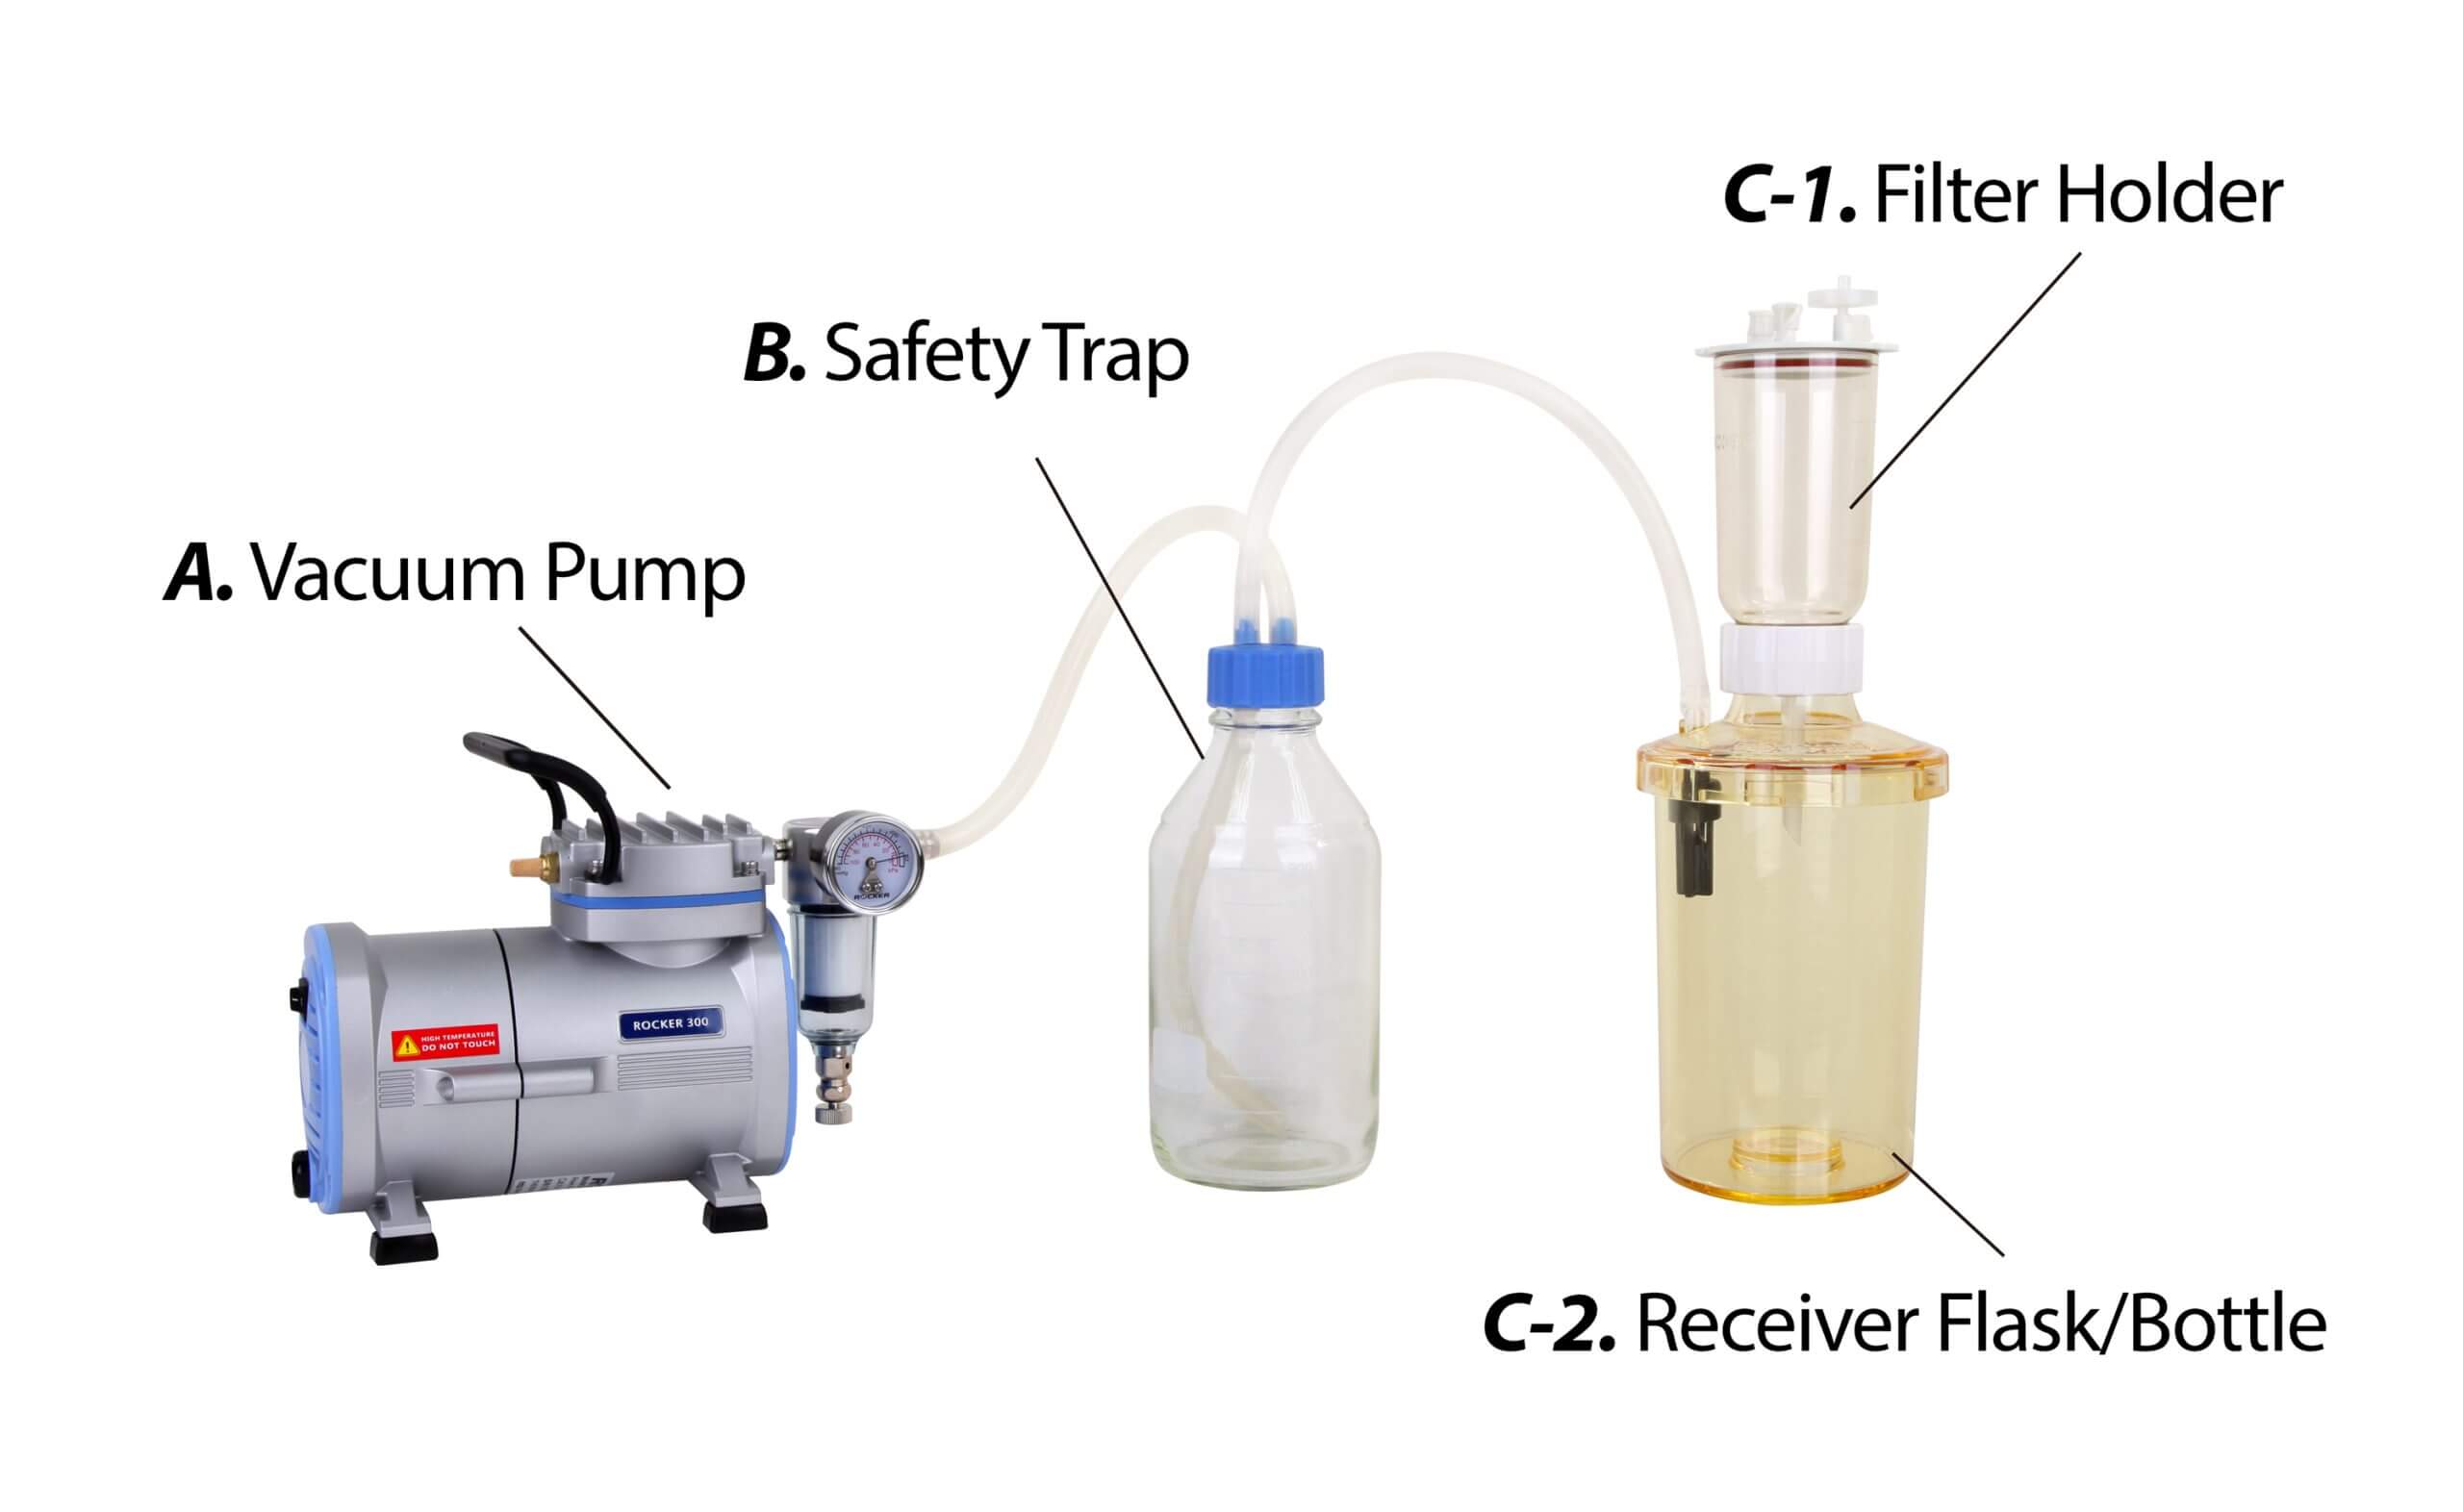 laboratory filtration apparatus including vacuum pump, safety trap, filter holder and flask.